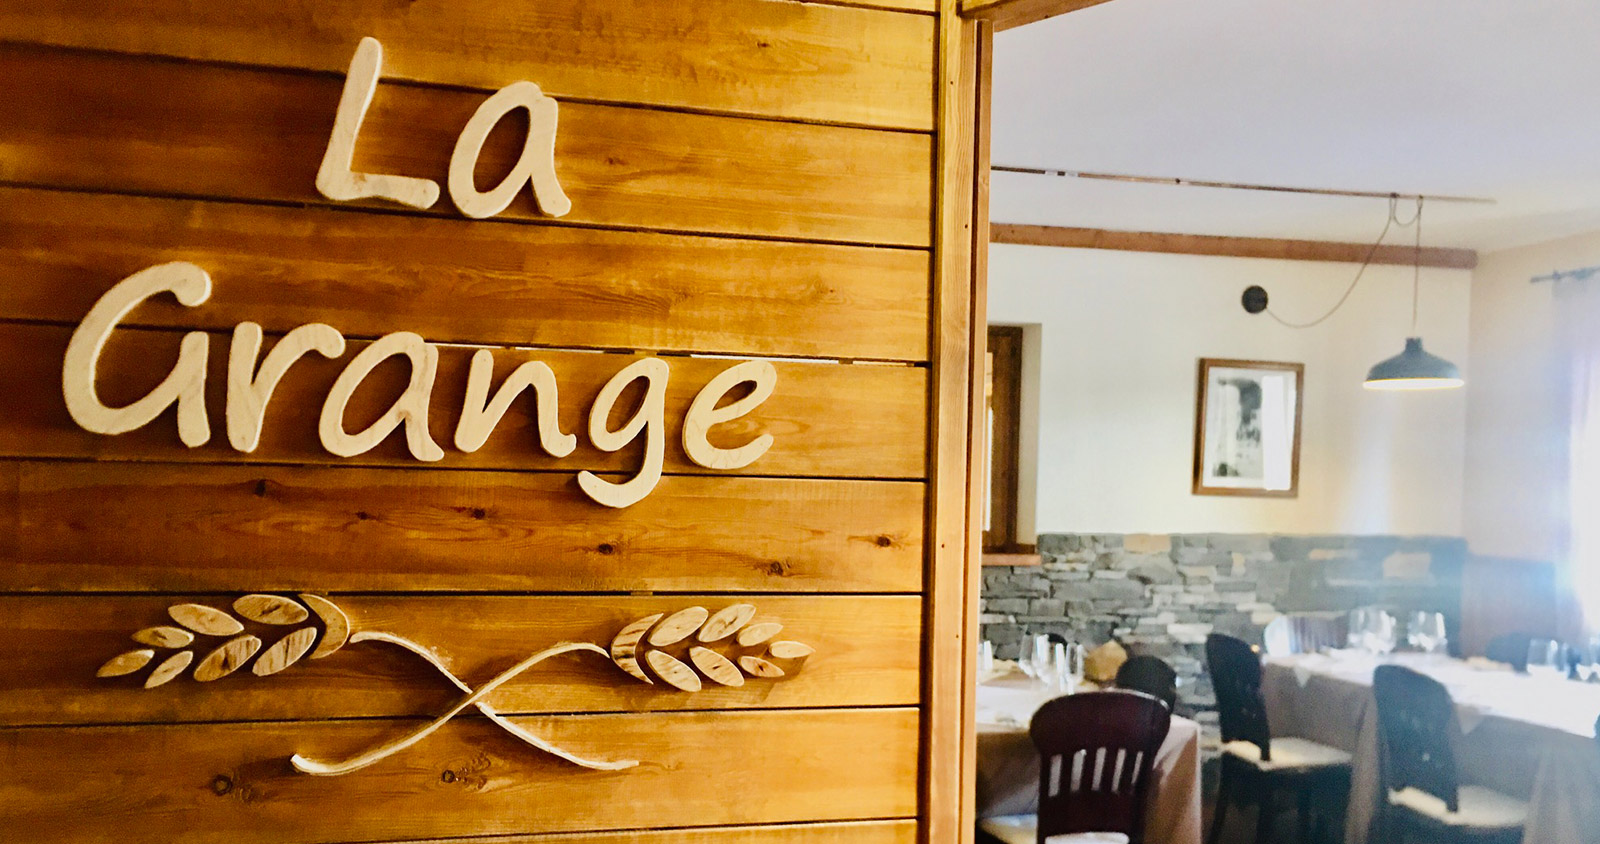 La Grange this summer will be Open but different!